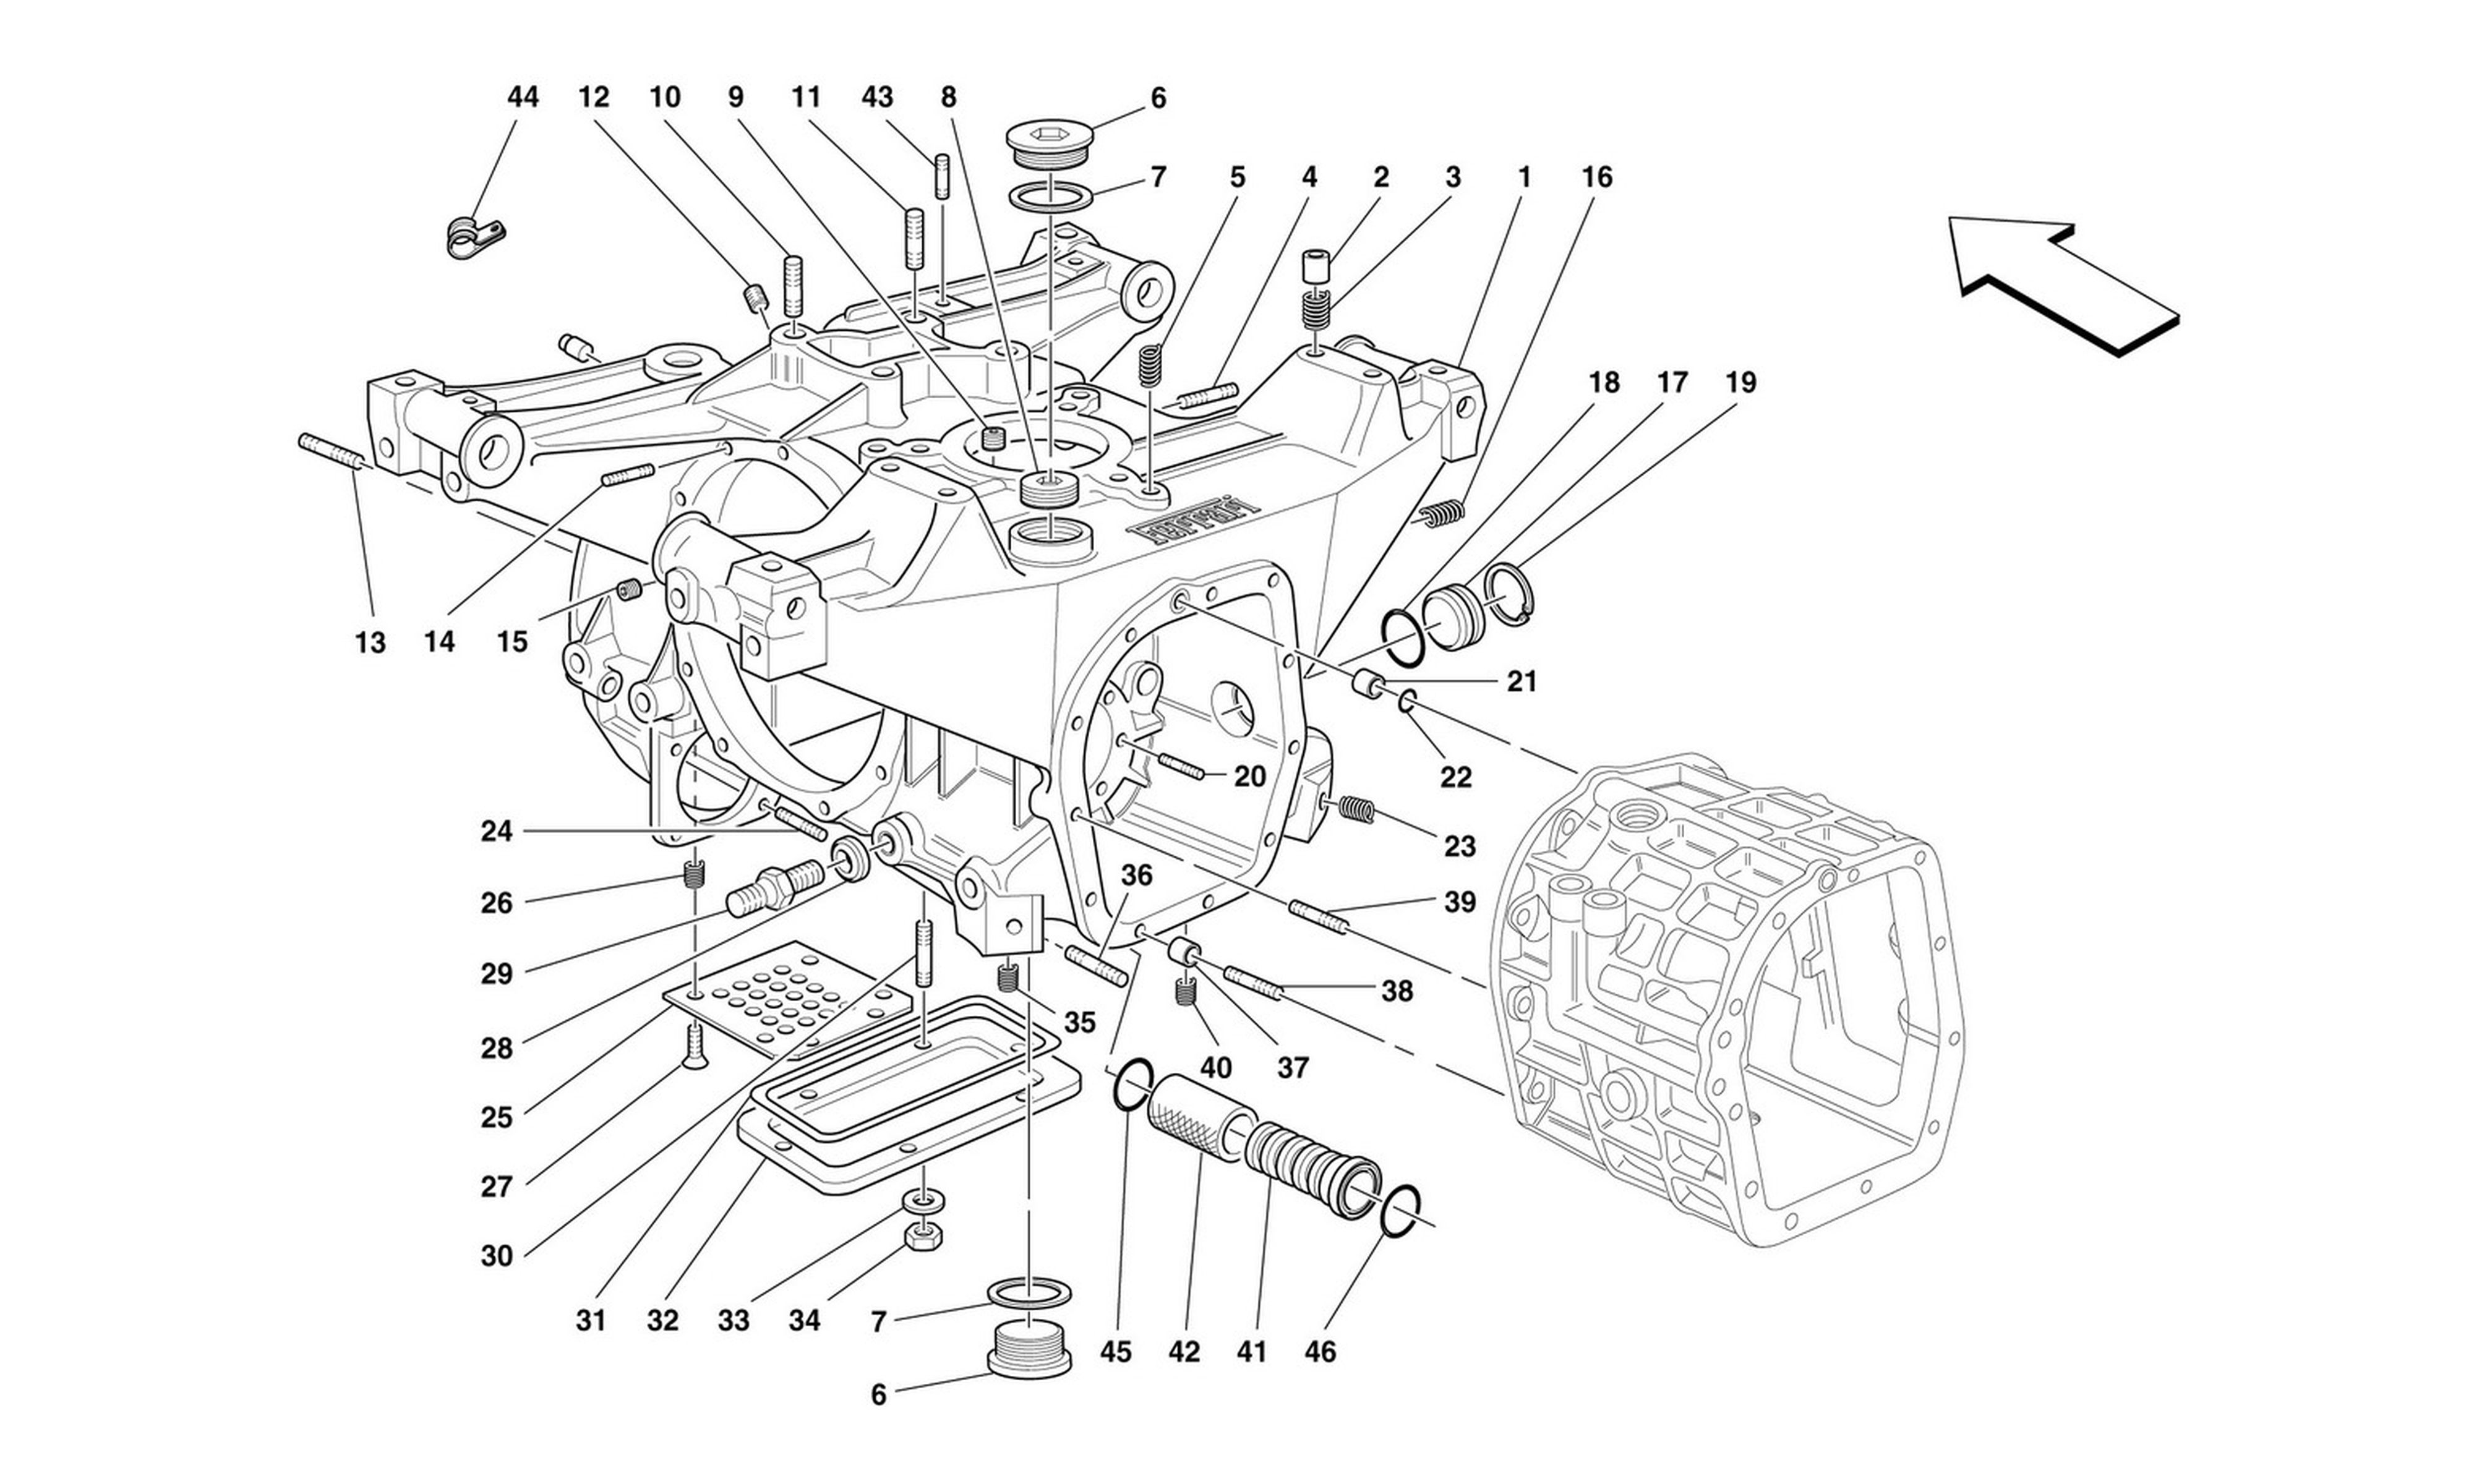 Schematic: Gearboxes/Differential Housing